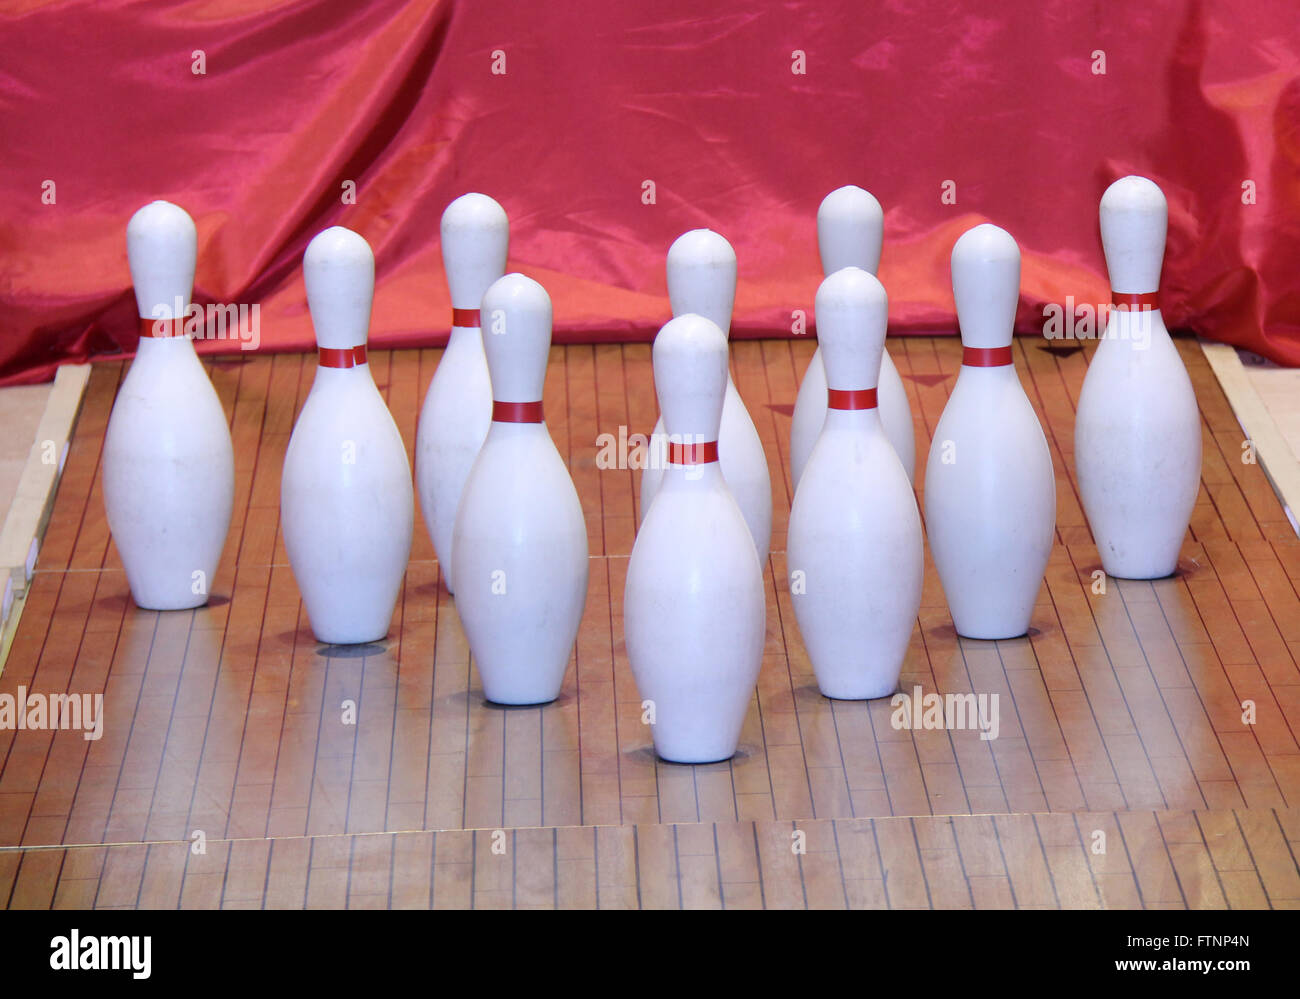 A Set of Tens Pins on a Wooden Bowling Alley. Stock Photo